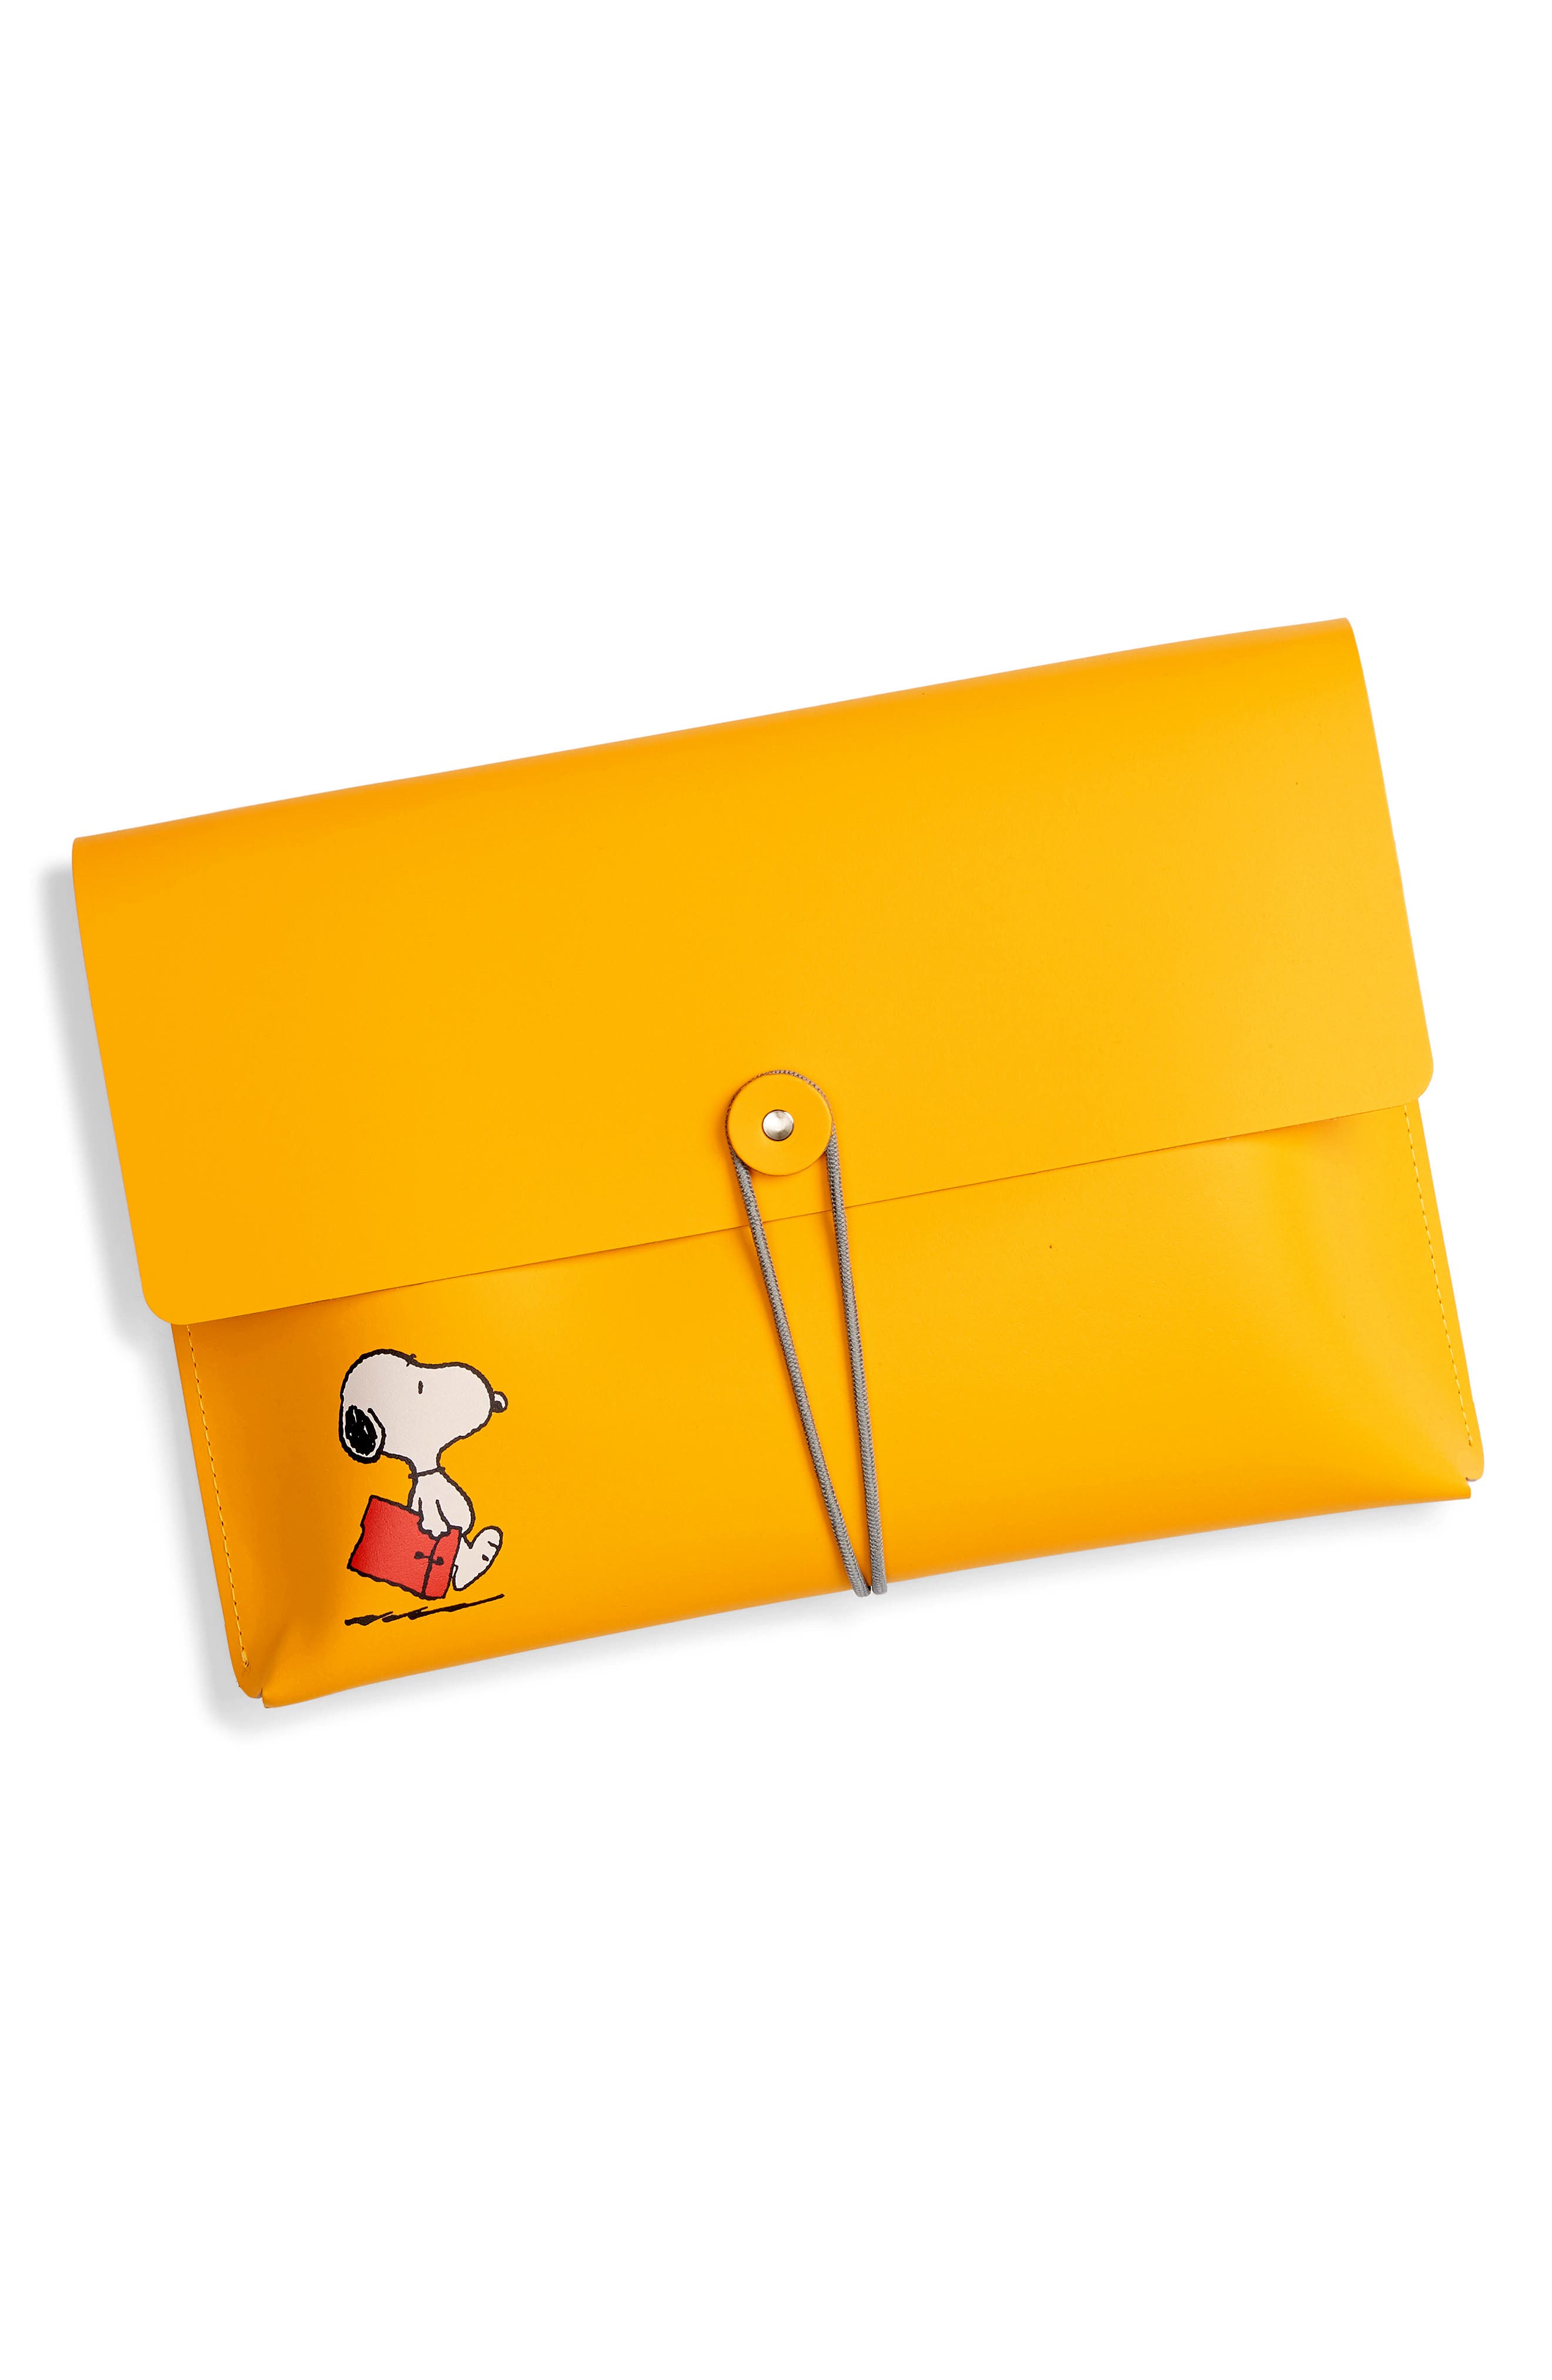 Fashion Snoopy Peanuts Women Girl Purse Clutch Wallet Card Holder Invoice Case